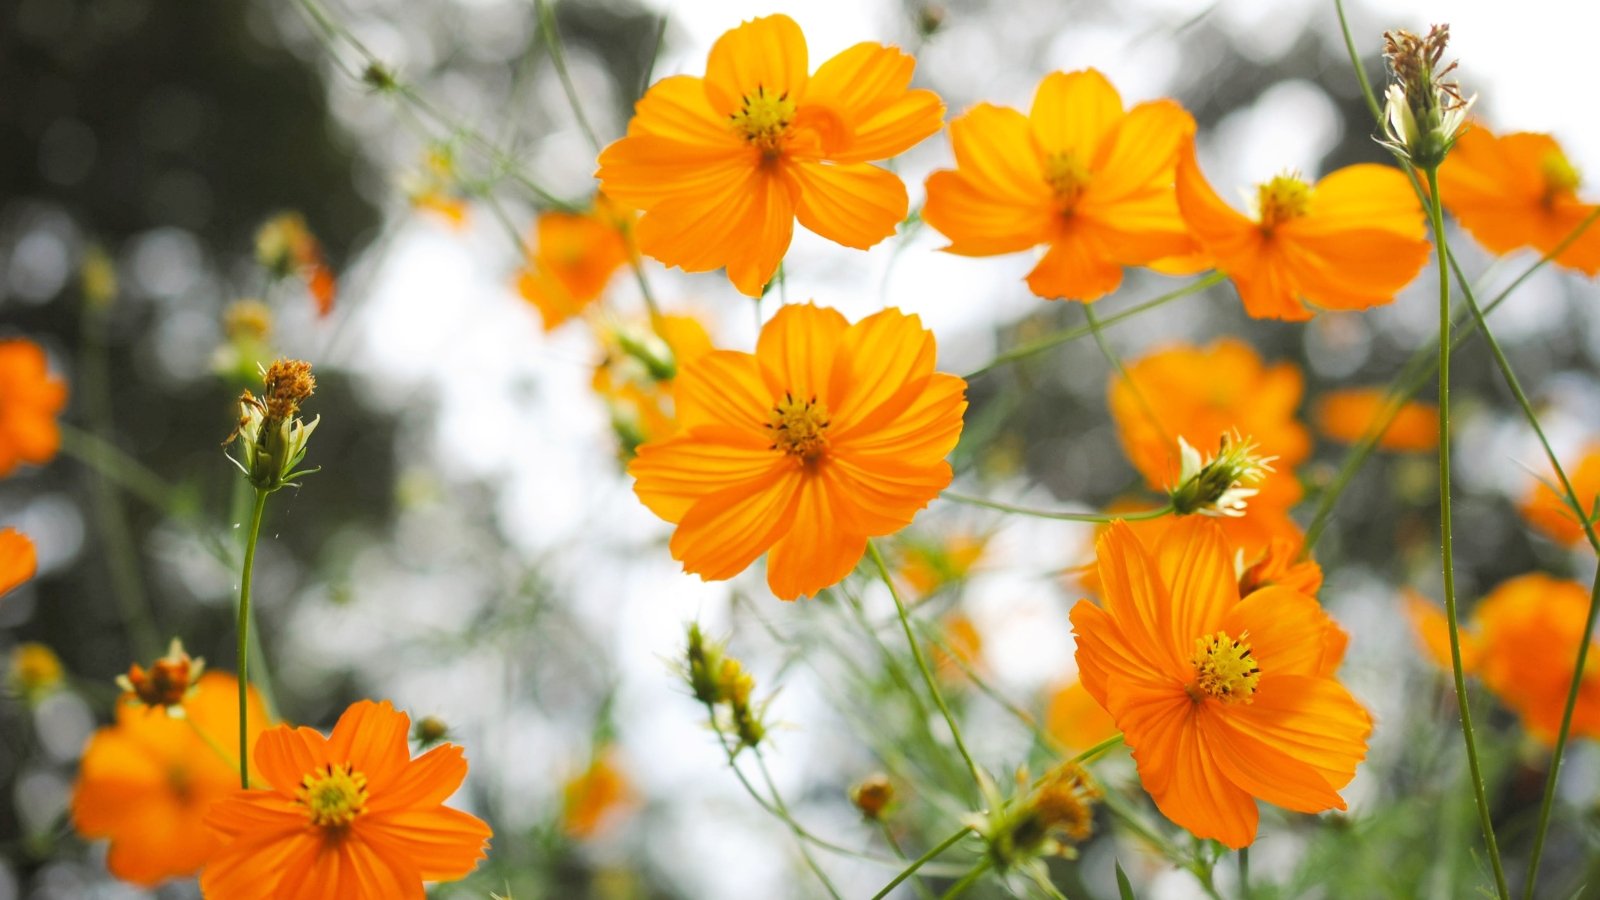 Vibrant orange cosmos bloom, slender stems swaying gracefully in the breeze, offering a striking contrast against the verdant backdrop of lush foliage in the garden.